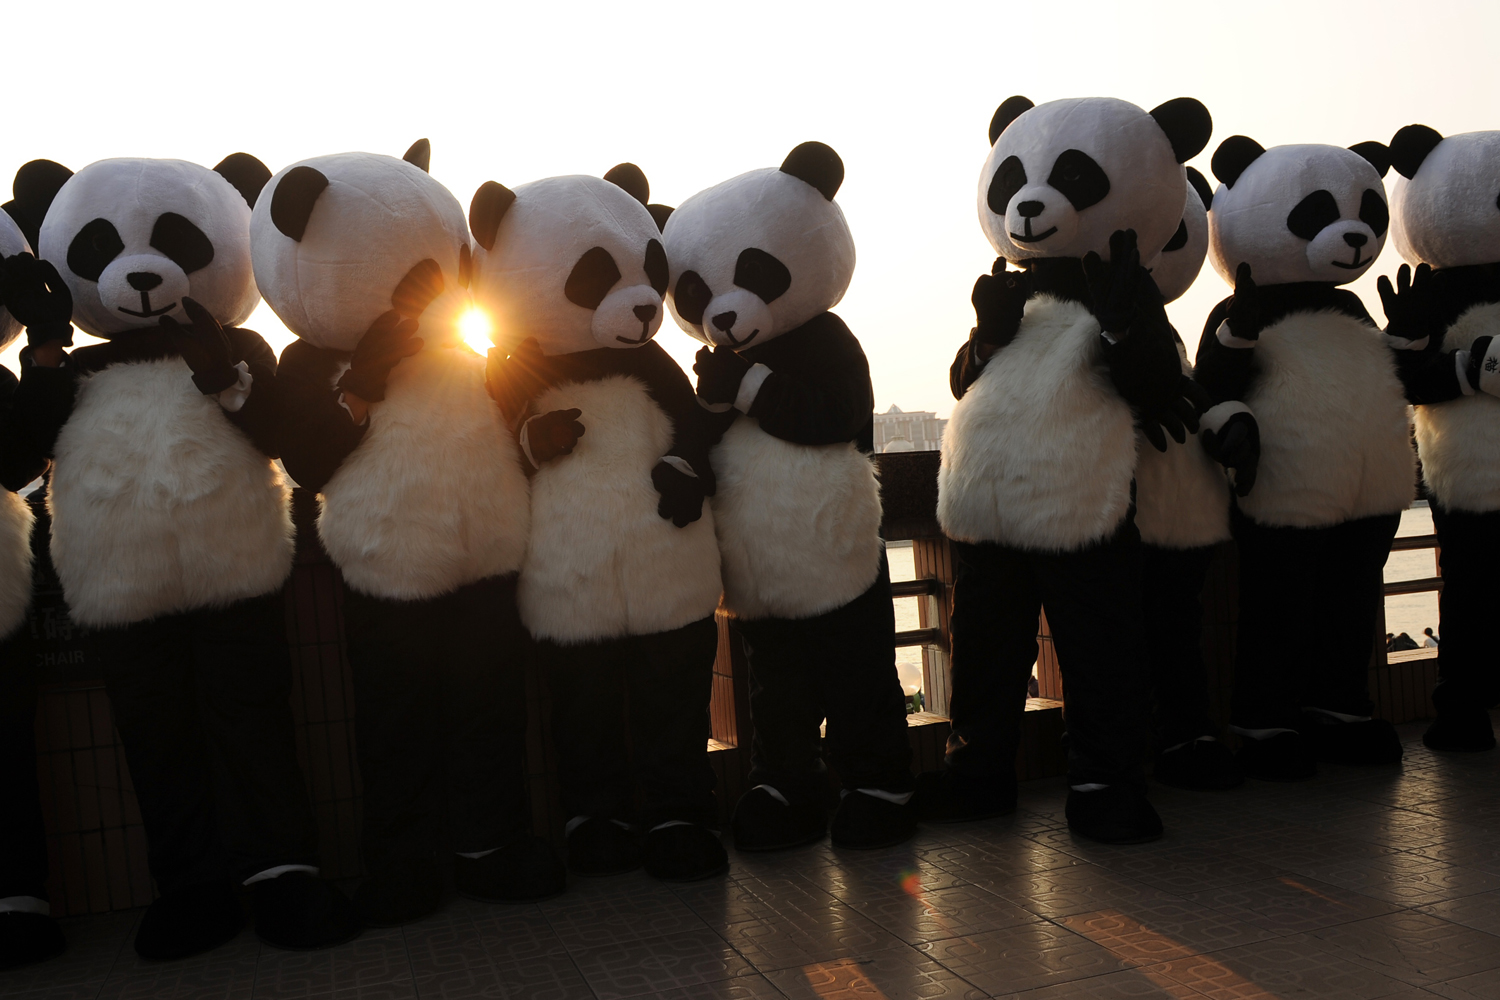 Image: Participants competing to become a world panda ambassador take a break in Shanghai. Twelve finalists from Britain, Singapore and the U.S. will be named in November as one of three globe-trotting "pambassadors" who will visit pandas around the world to promote conservation.